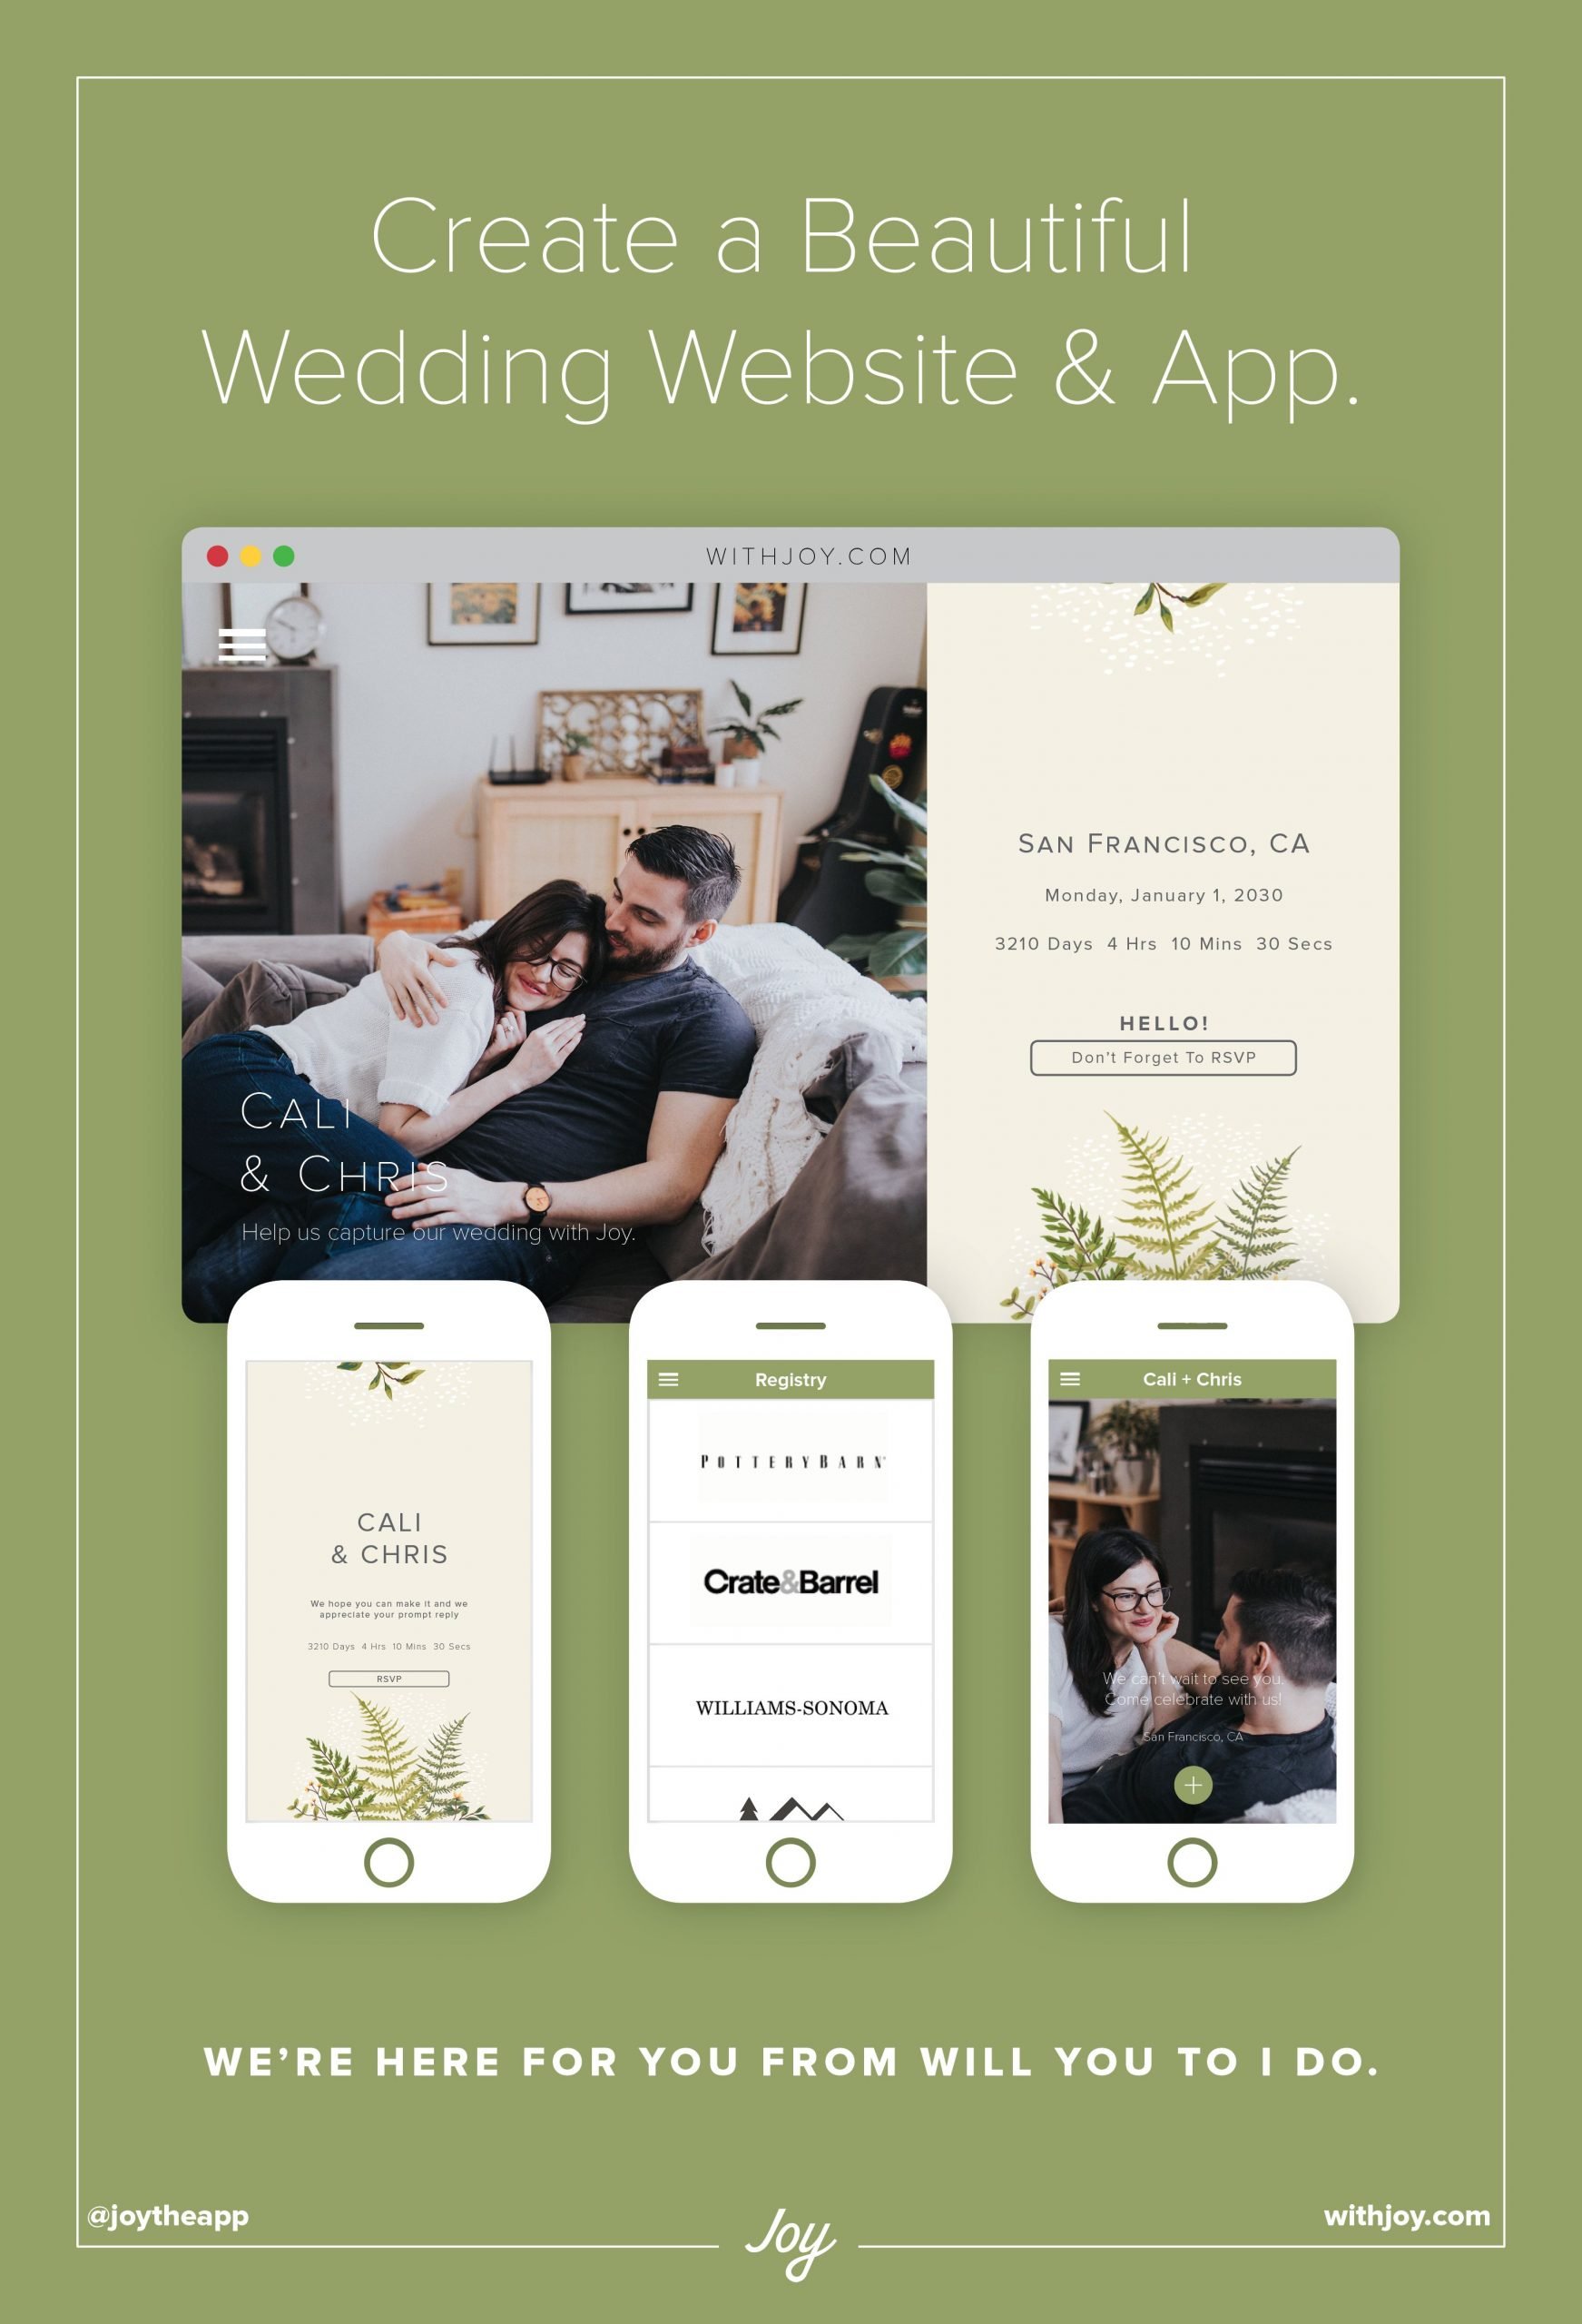 Create a free wedding website and app with Joy!